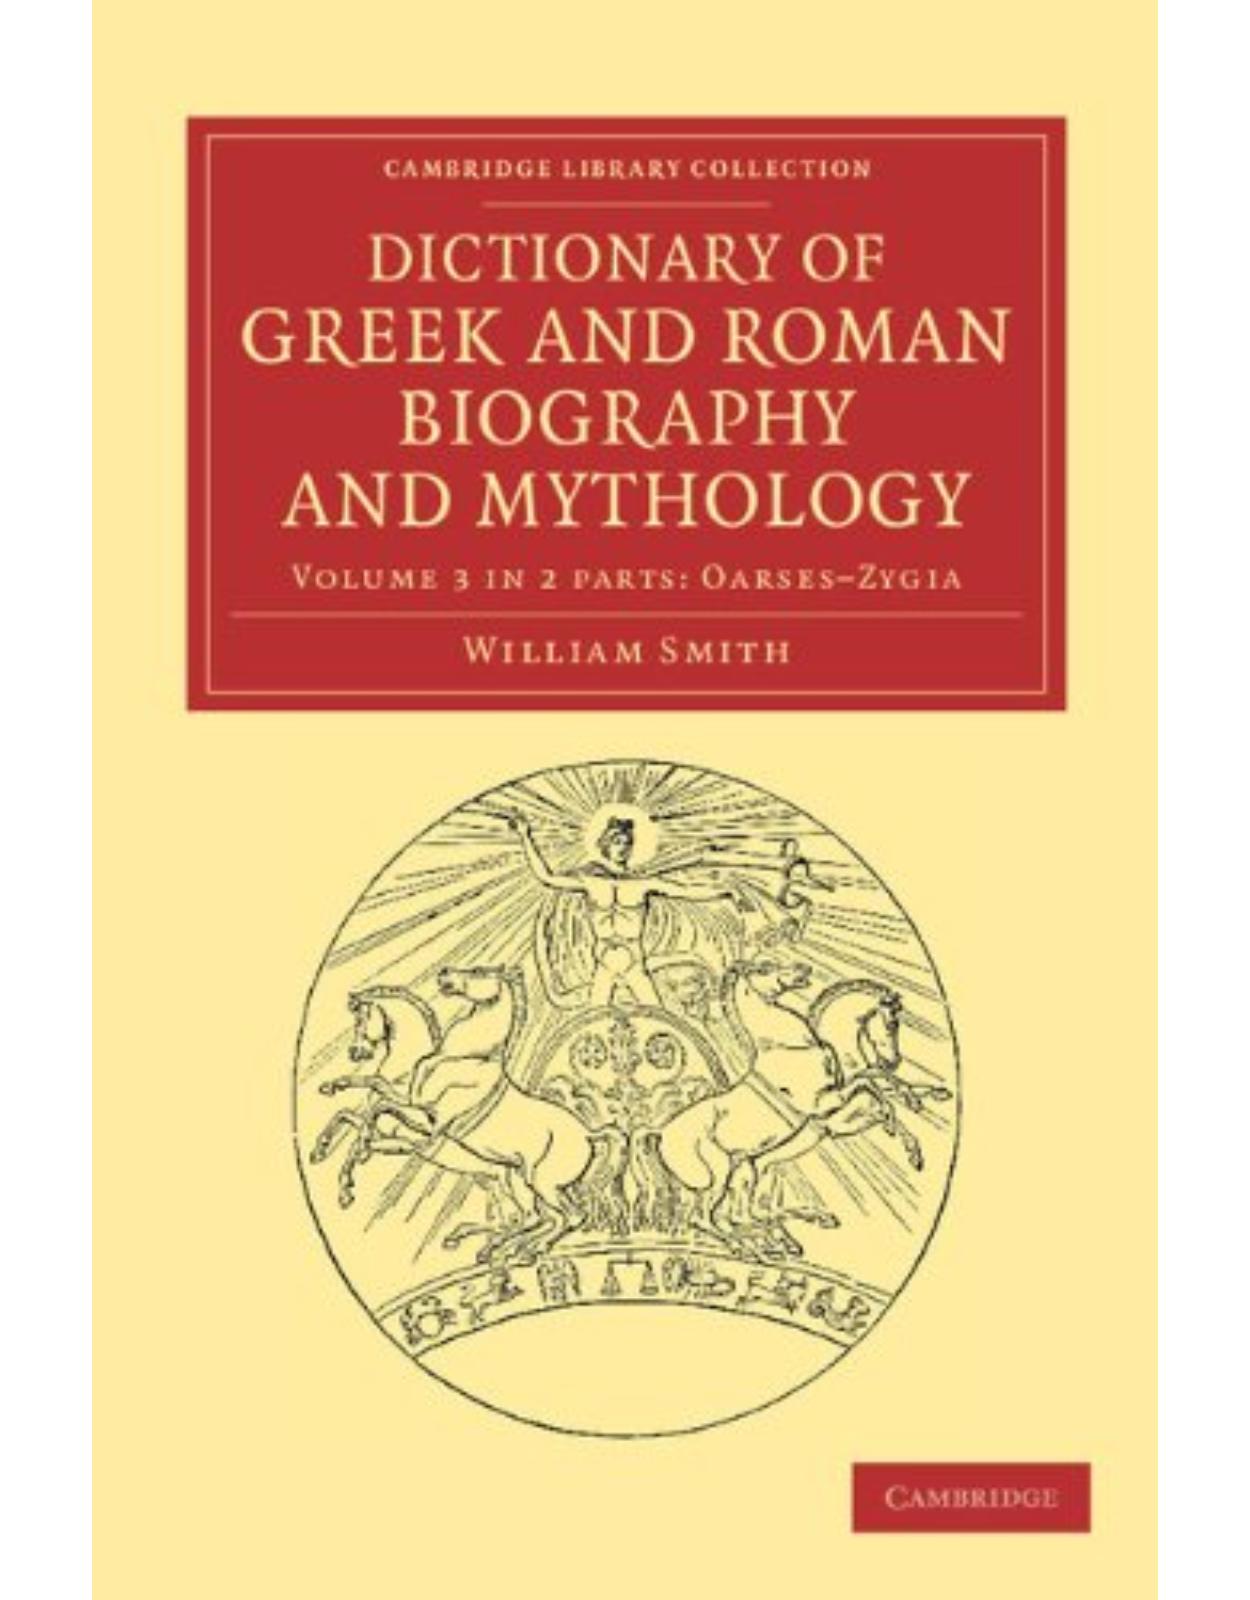 Dictionary of Greek and Roman Biography and Mythology 3 Volume Set in 6 Pieces: Dictionary of Greek and Roman Biography and Mythology 2 Part Set: Volume 3 (Cambridge Library Collection - Classics)